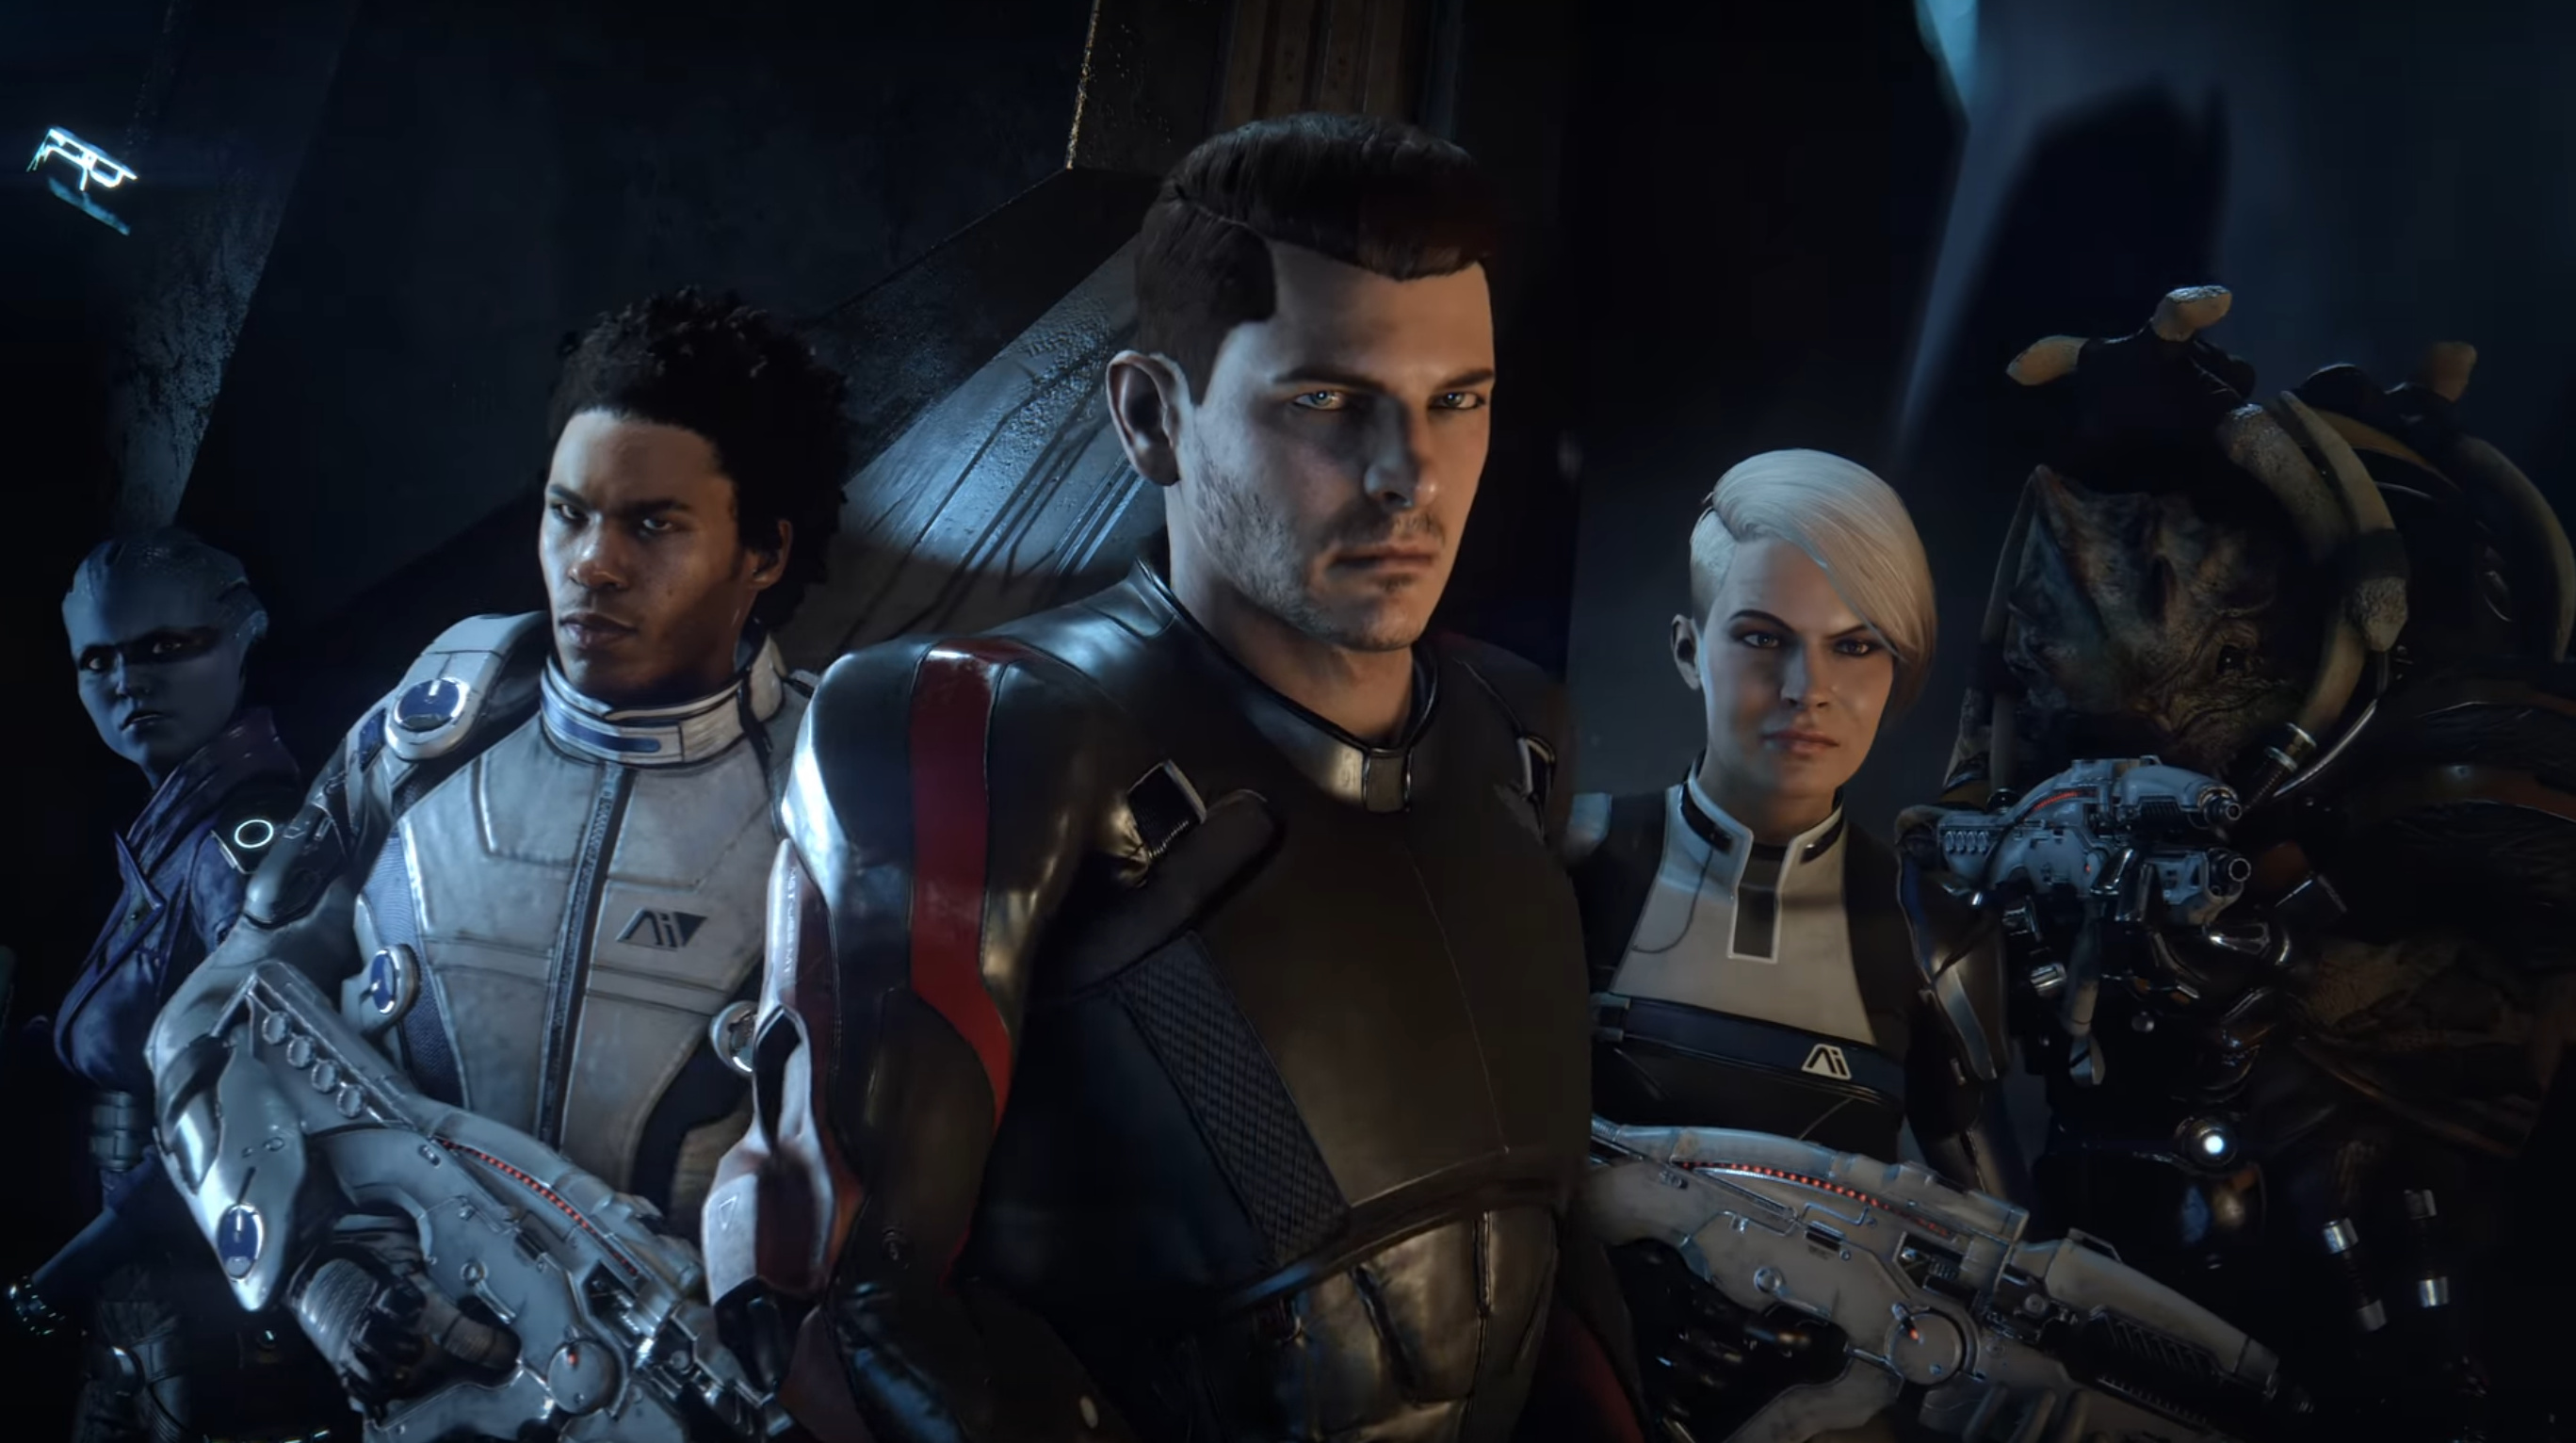 Mass Effect Andromedas Dialogue System Sounds A Lot Better For Role 